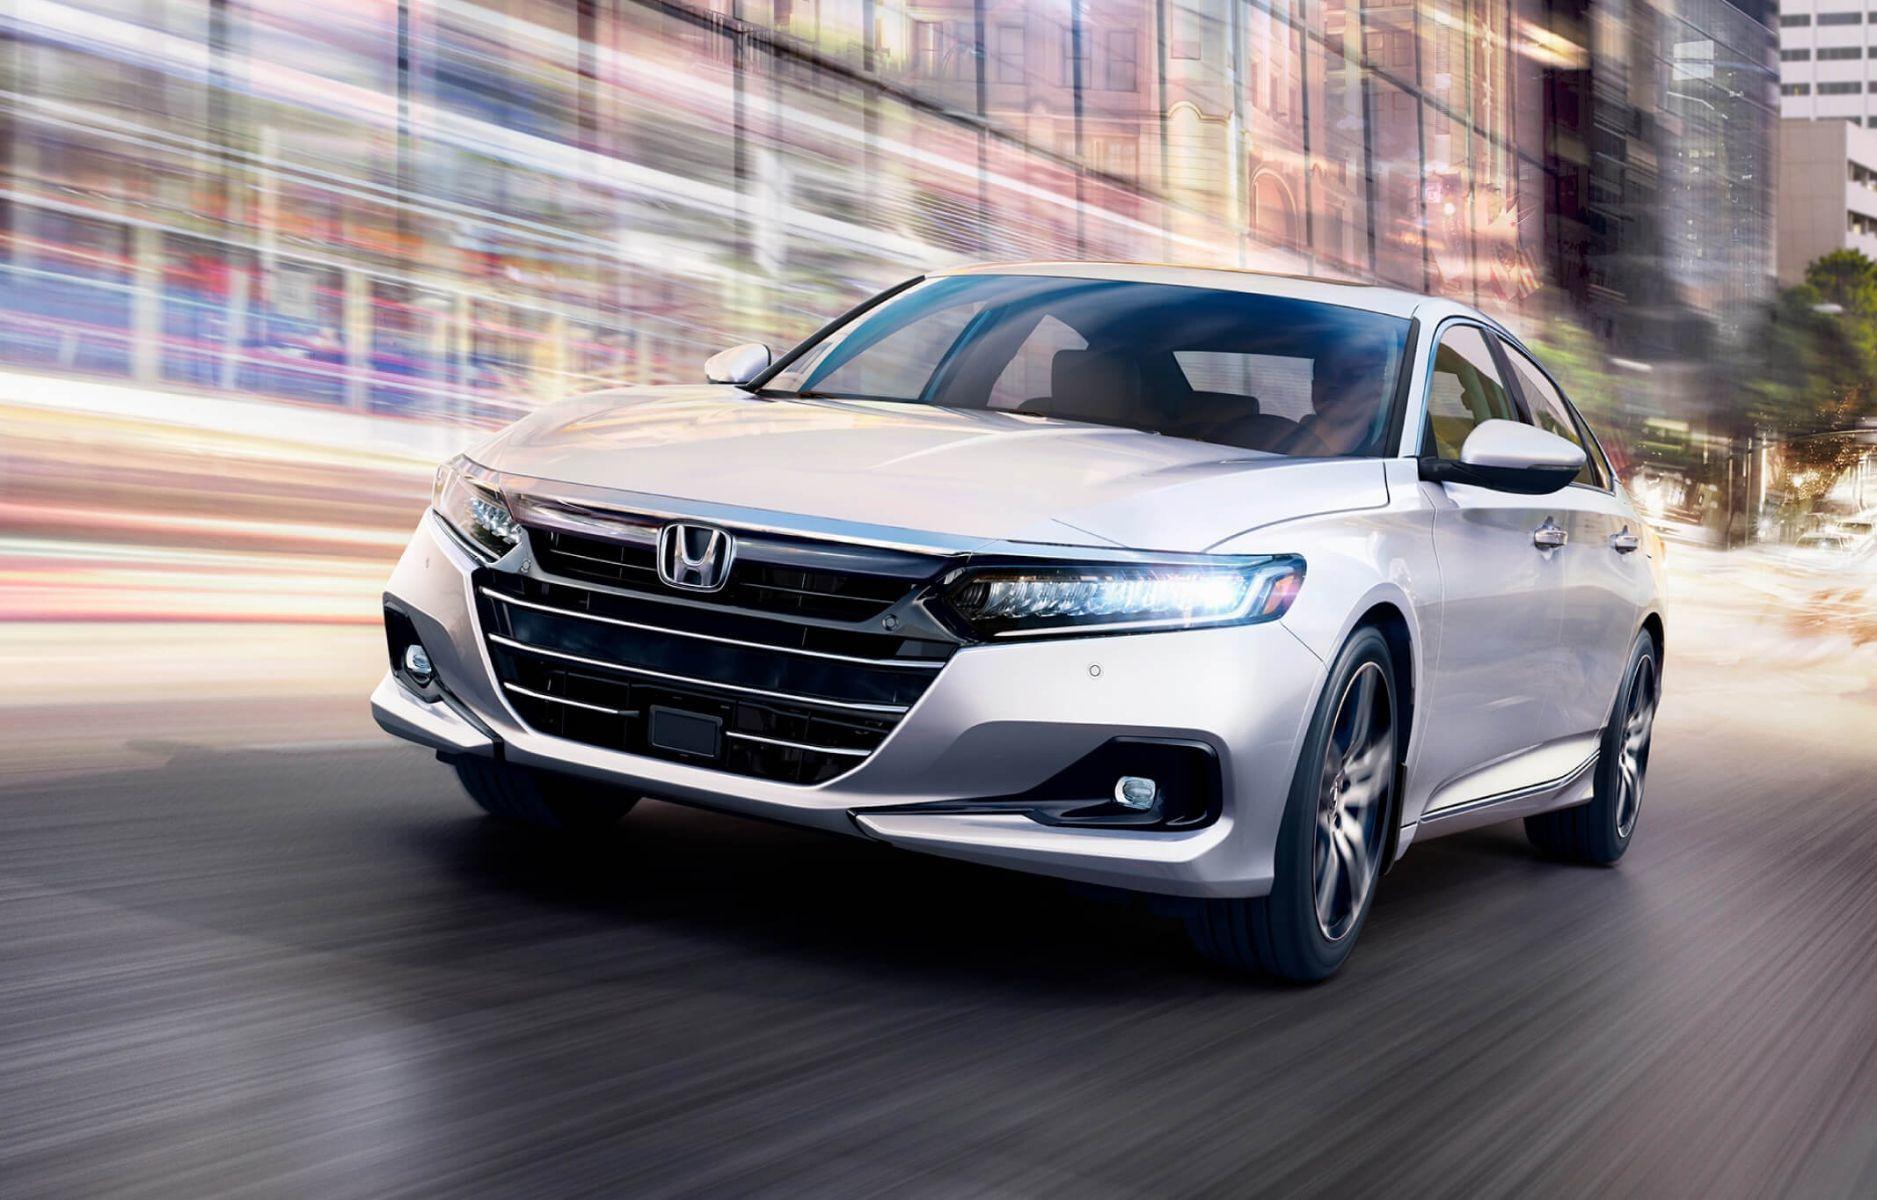 What Is The Difference Between The Honda Accord Sport And EX-L?